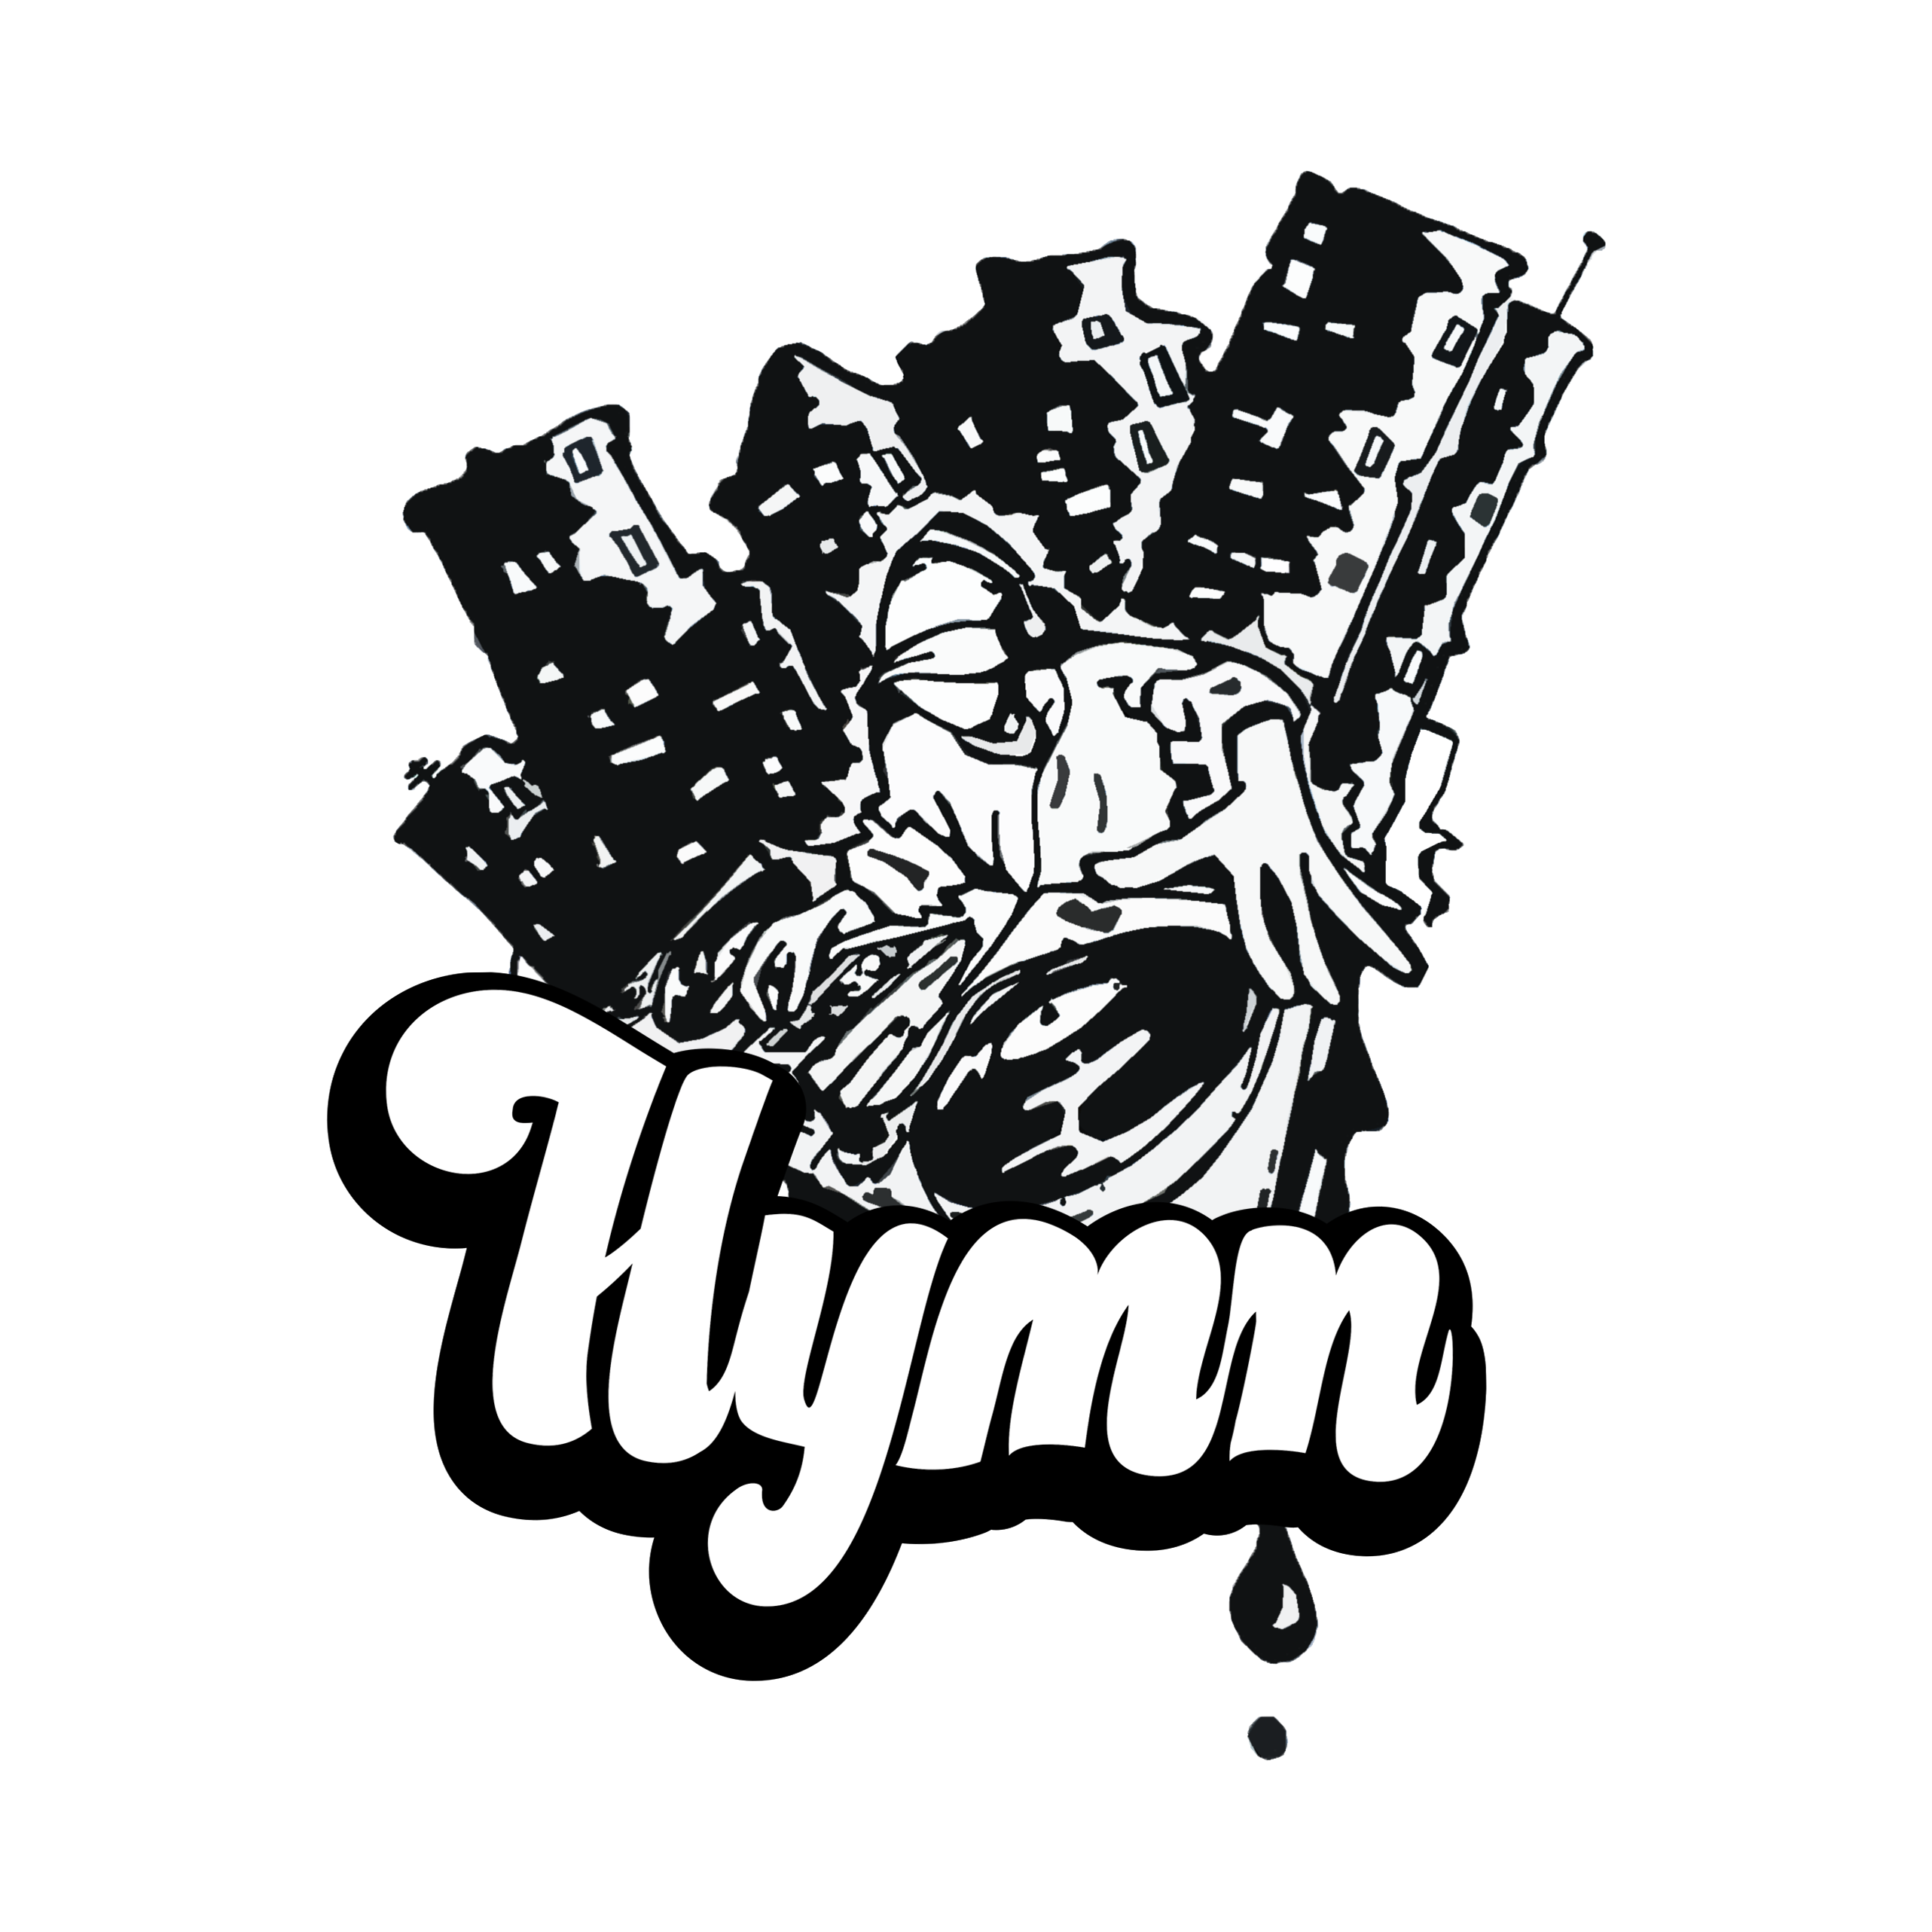 Dj Hymn Podcasts: A Fresher Kind Of Noise